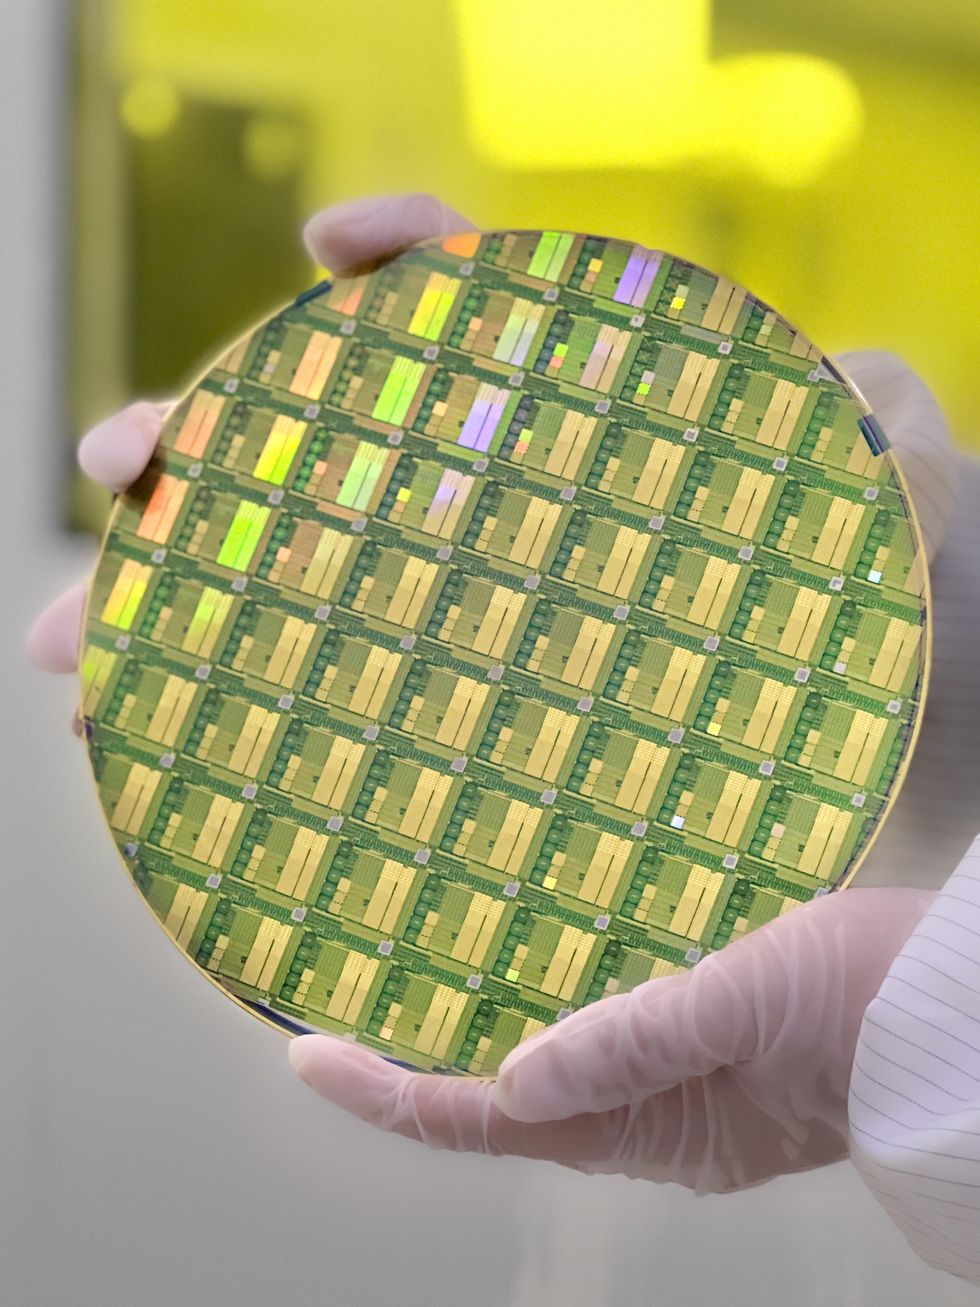 Gloved hand holding circular wafer with chip array